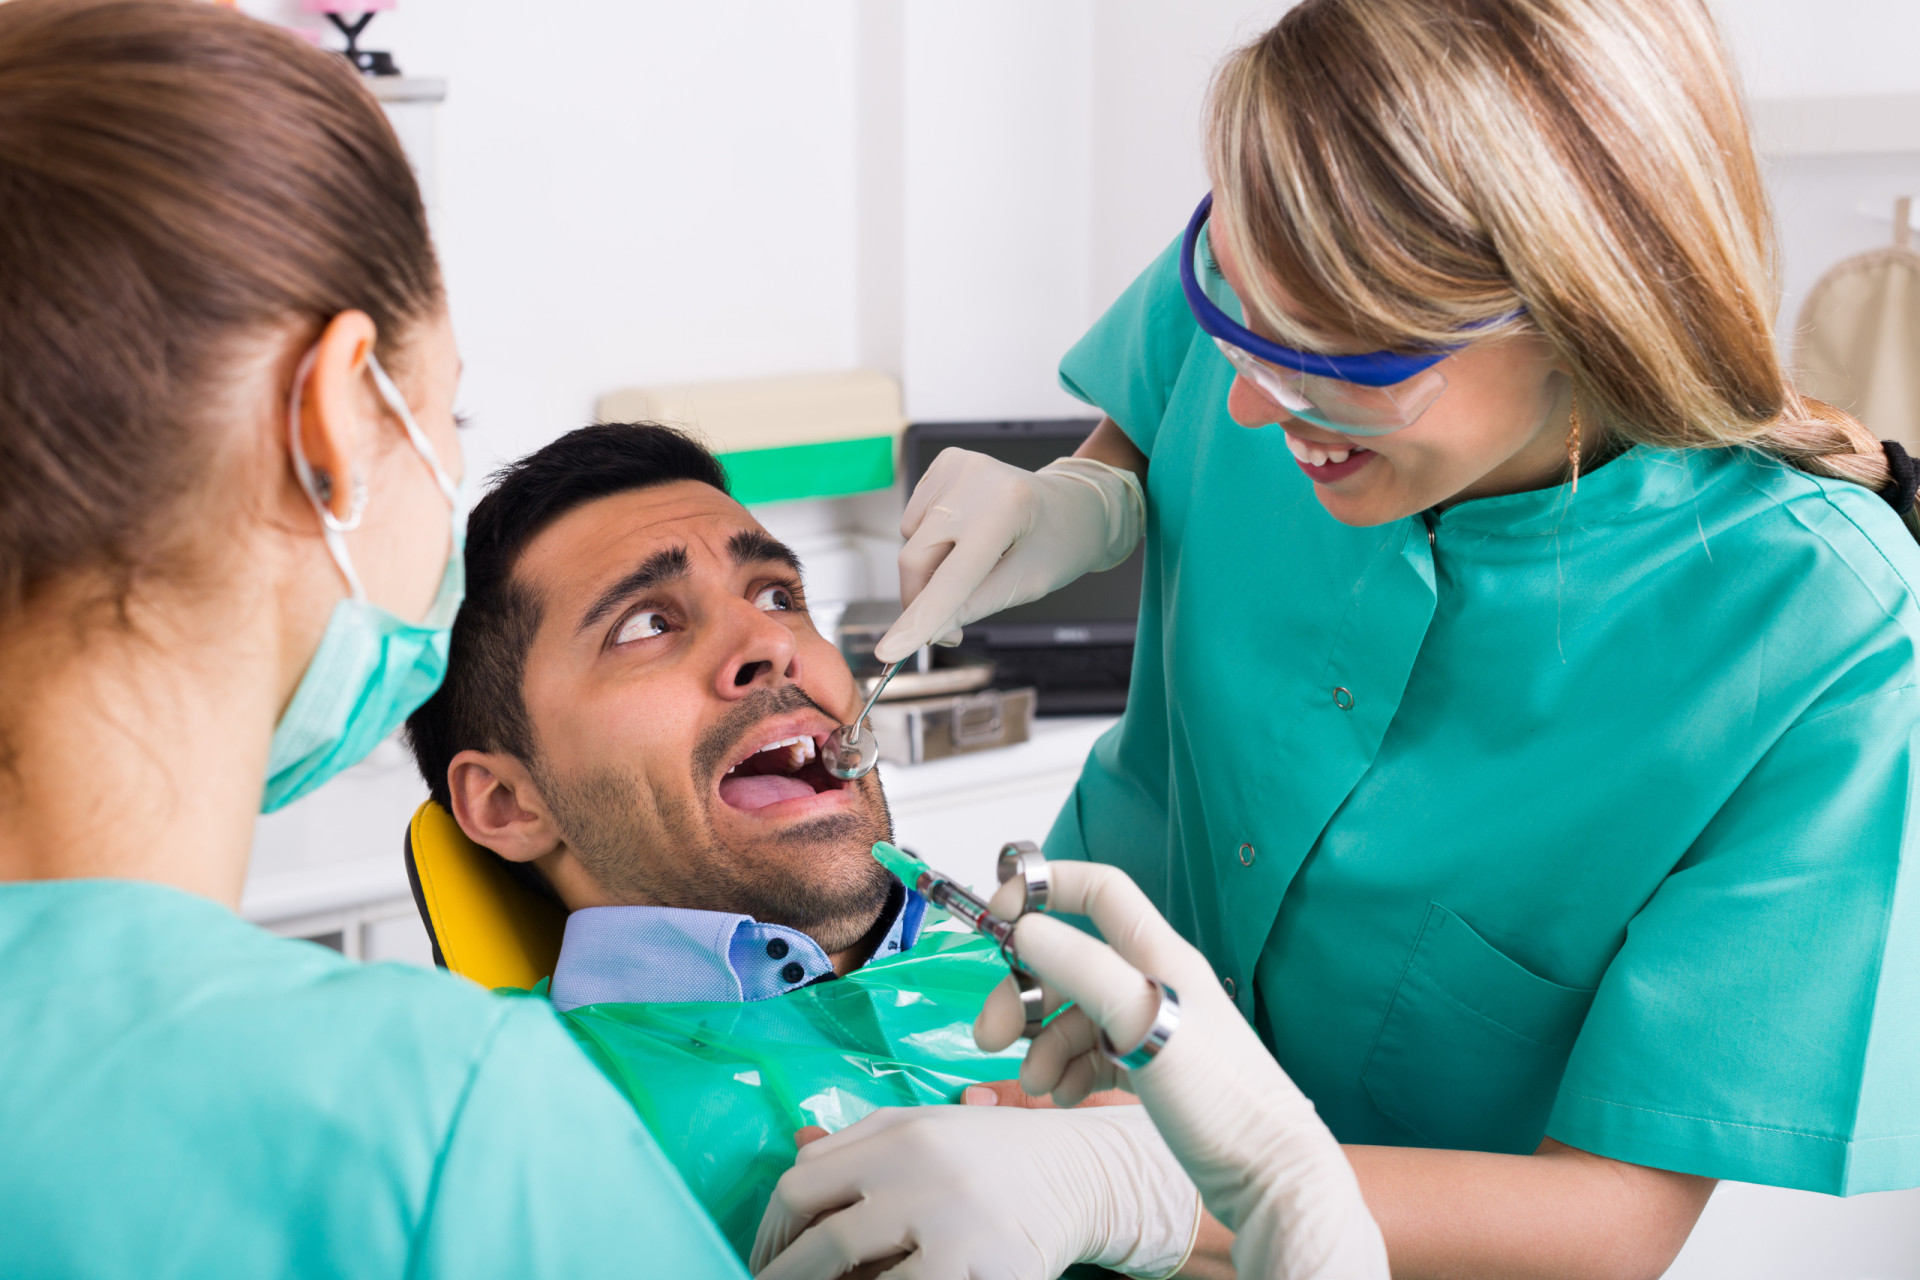 <p>It's safe to say that most of us don't jump for joy before going to the dentist. Still, taking care of our <a href="https://www.starsinsider.com/health/231080/oral-hygiene-all-your-questions-answered" rel="noopener">oral</a> health is of utmost importance, so we do our best to make the trip worthwhile. There are, however, do's and don'ts we should be aware of when it comes to paying the dentist a visit.</p> <p>In this gallery, we go through some of the most common things many of us are guilty of doing before going to the dentist. Click through to learn all about them.</p><p>You may also like:<a href="https://www.starsinsider.com/n/167278?utm_source=msn.com&utm_medium=display&utm_campaign=referral_description&utm_content=516746v2en-en"> Brave and beautiful! Female celebrities who've shaved their head</a></p>